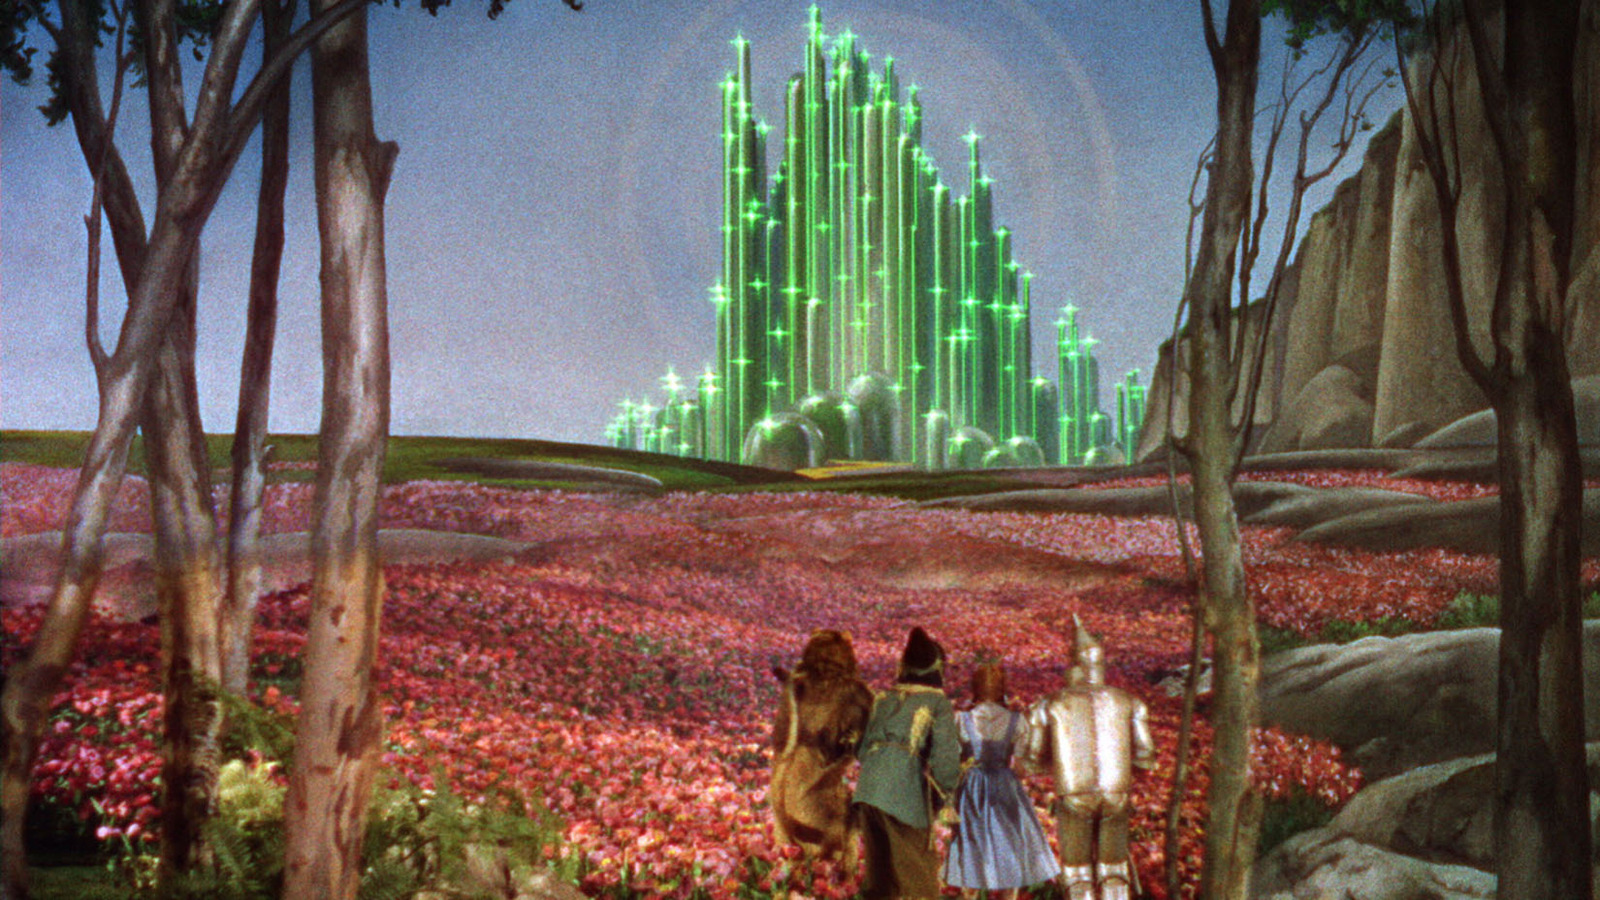 What It Was Really Like To See The Wizard Of Oz In 1939